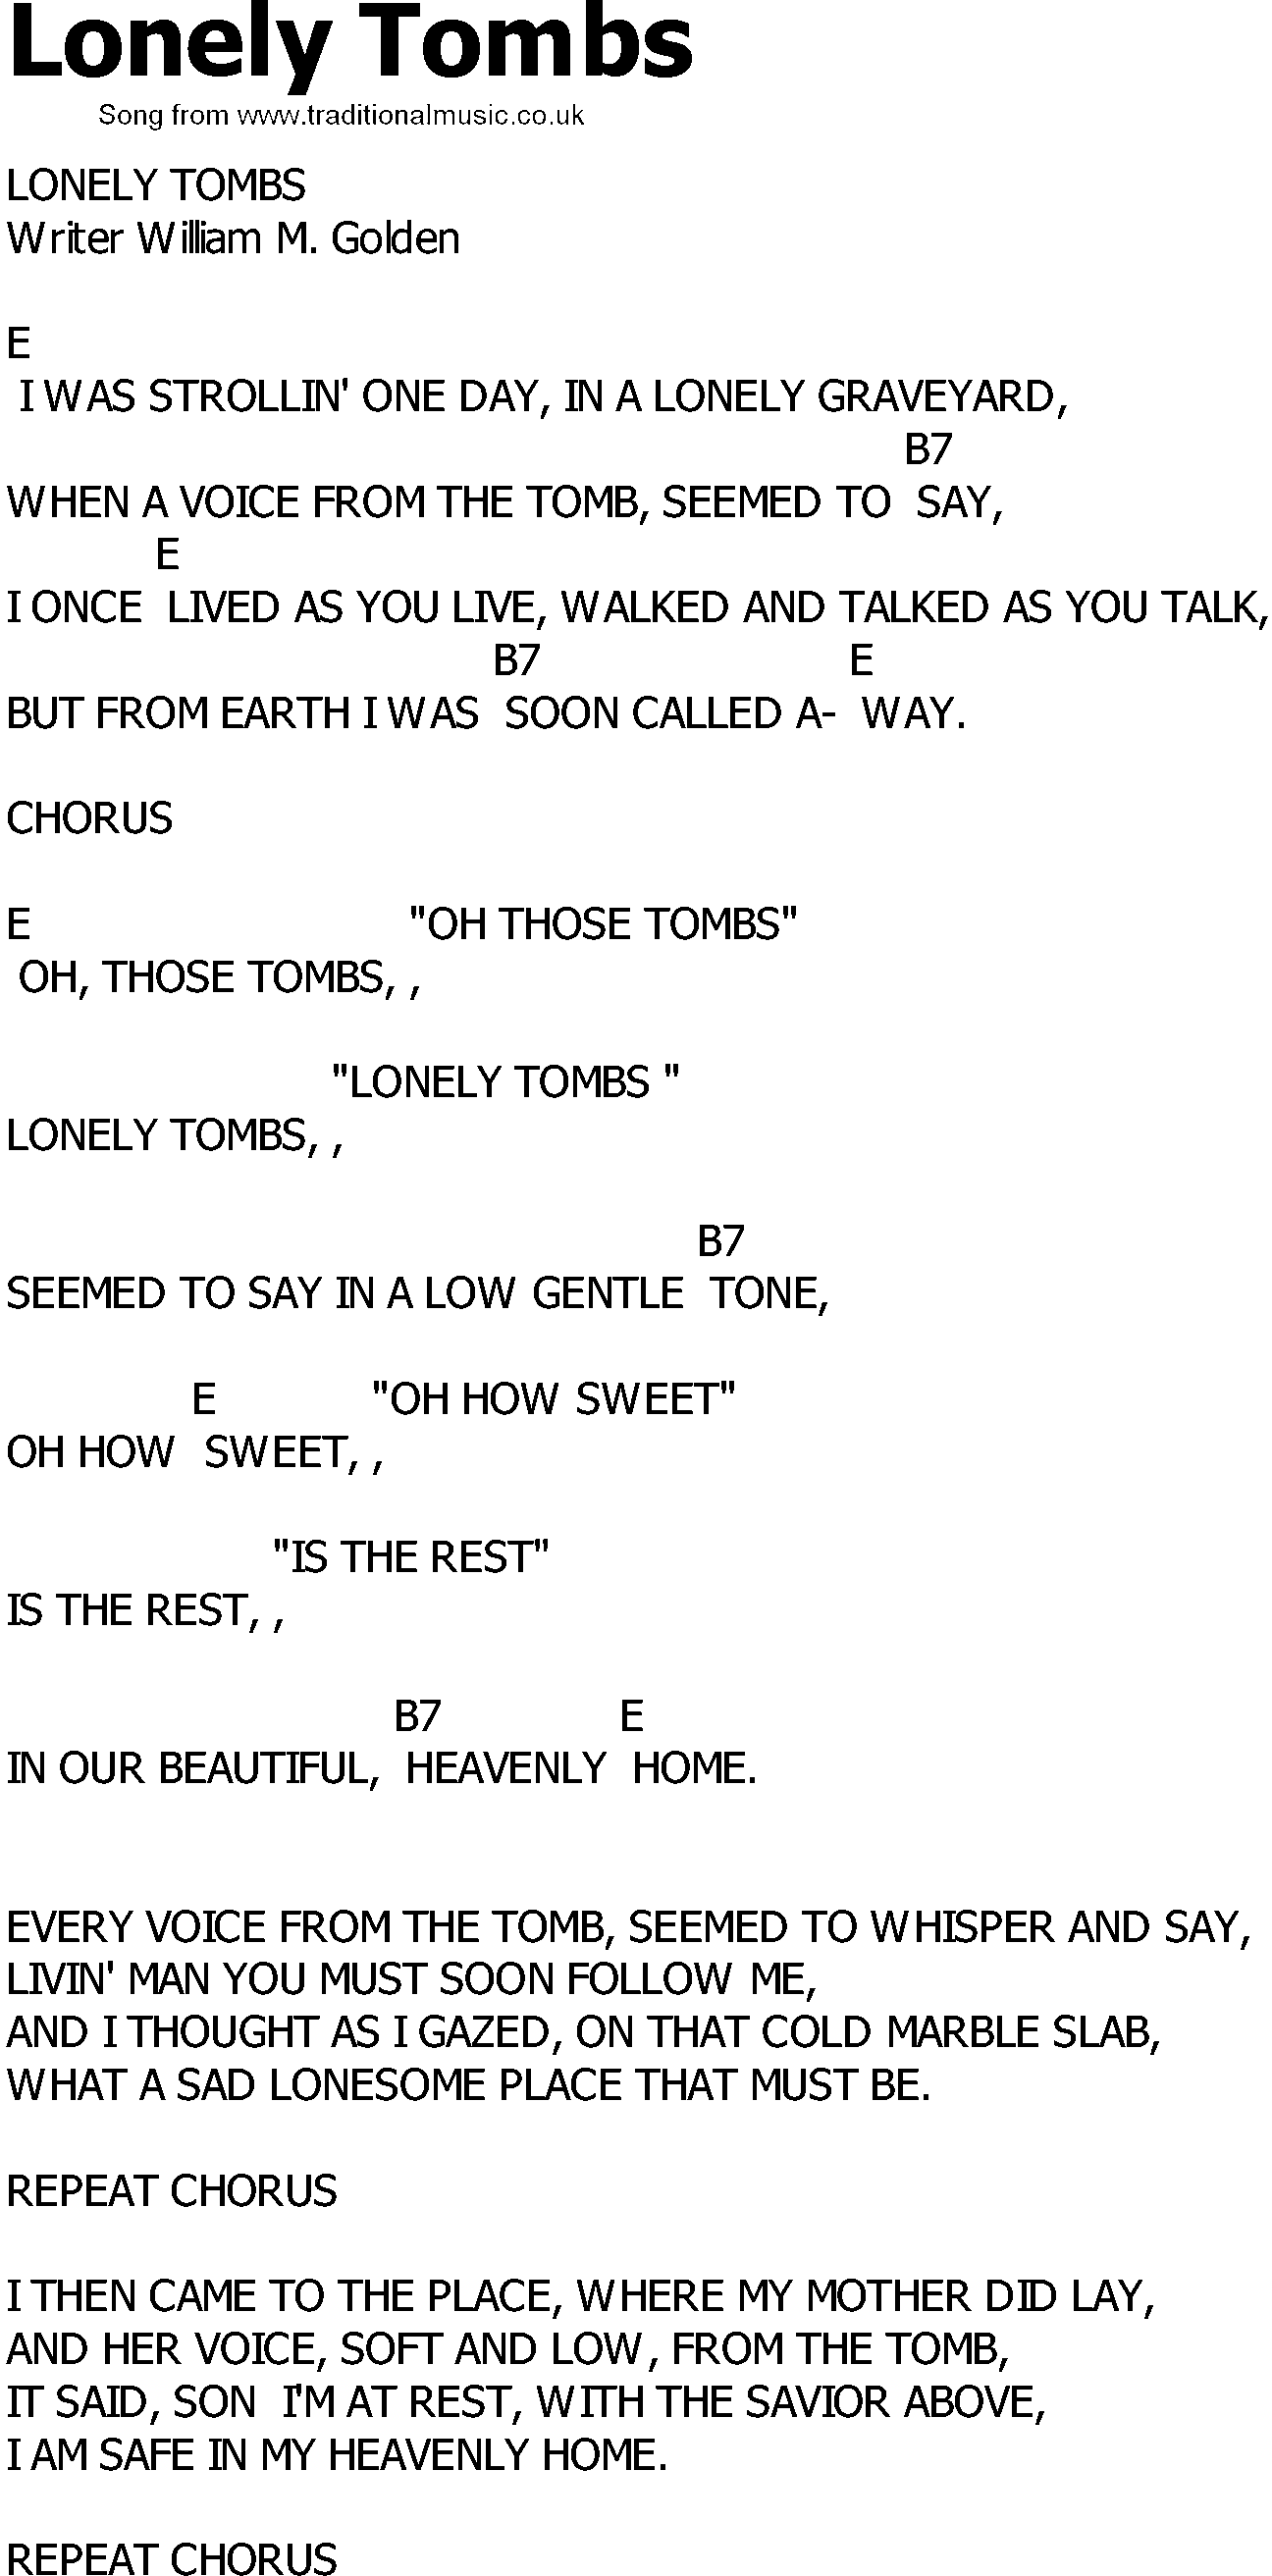 Old Country song lyrics with chords - Lonely Tombs